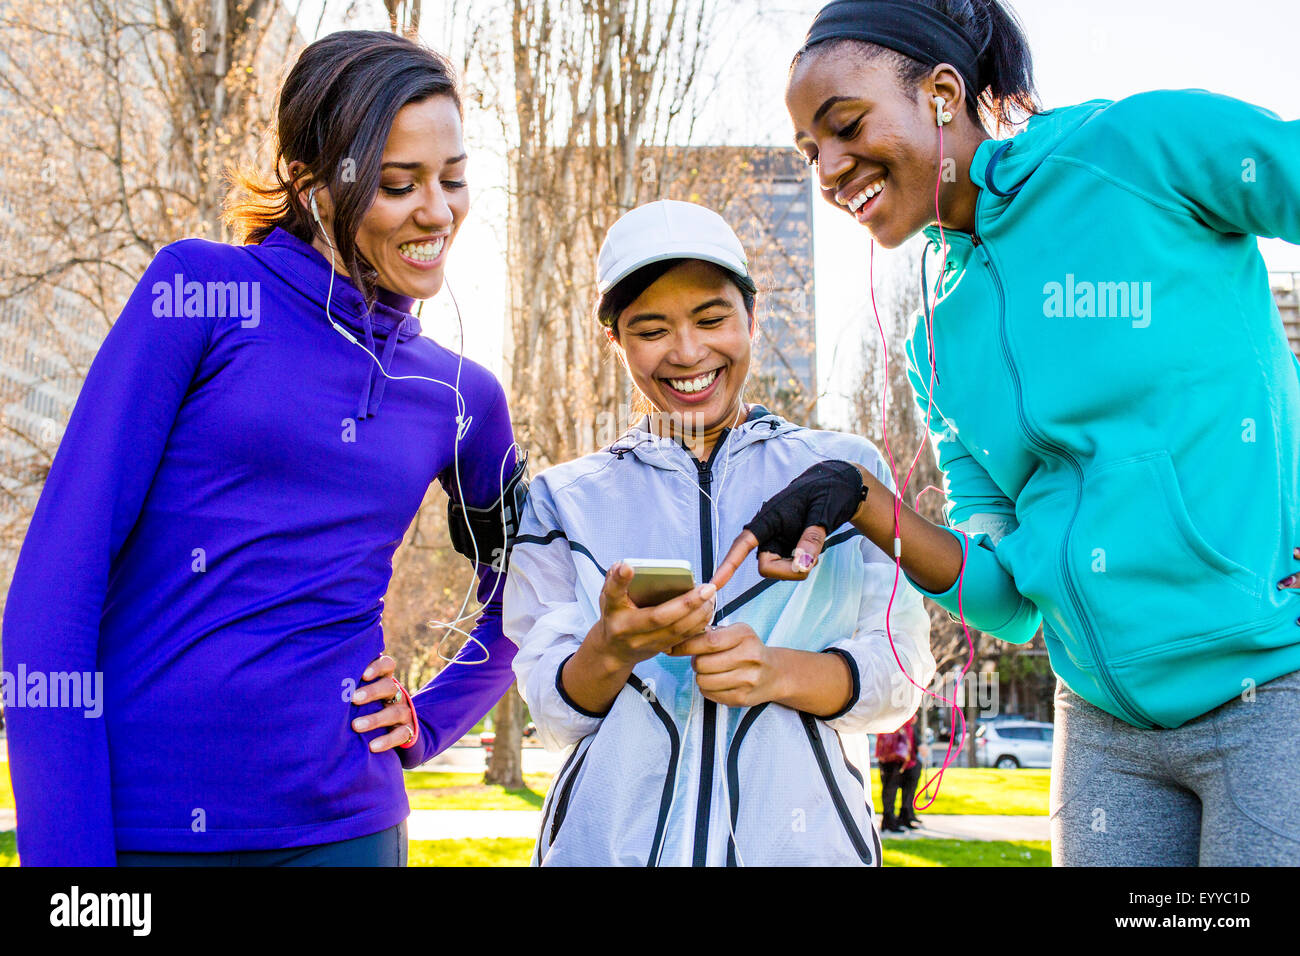 Runners using cell phone in urban park Stock Photo